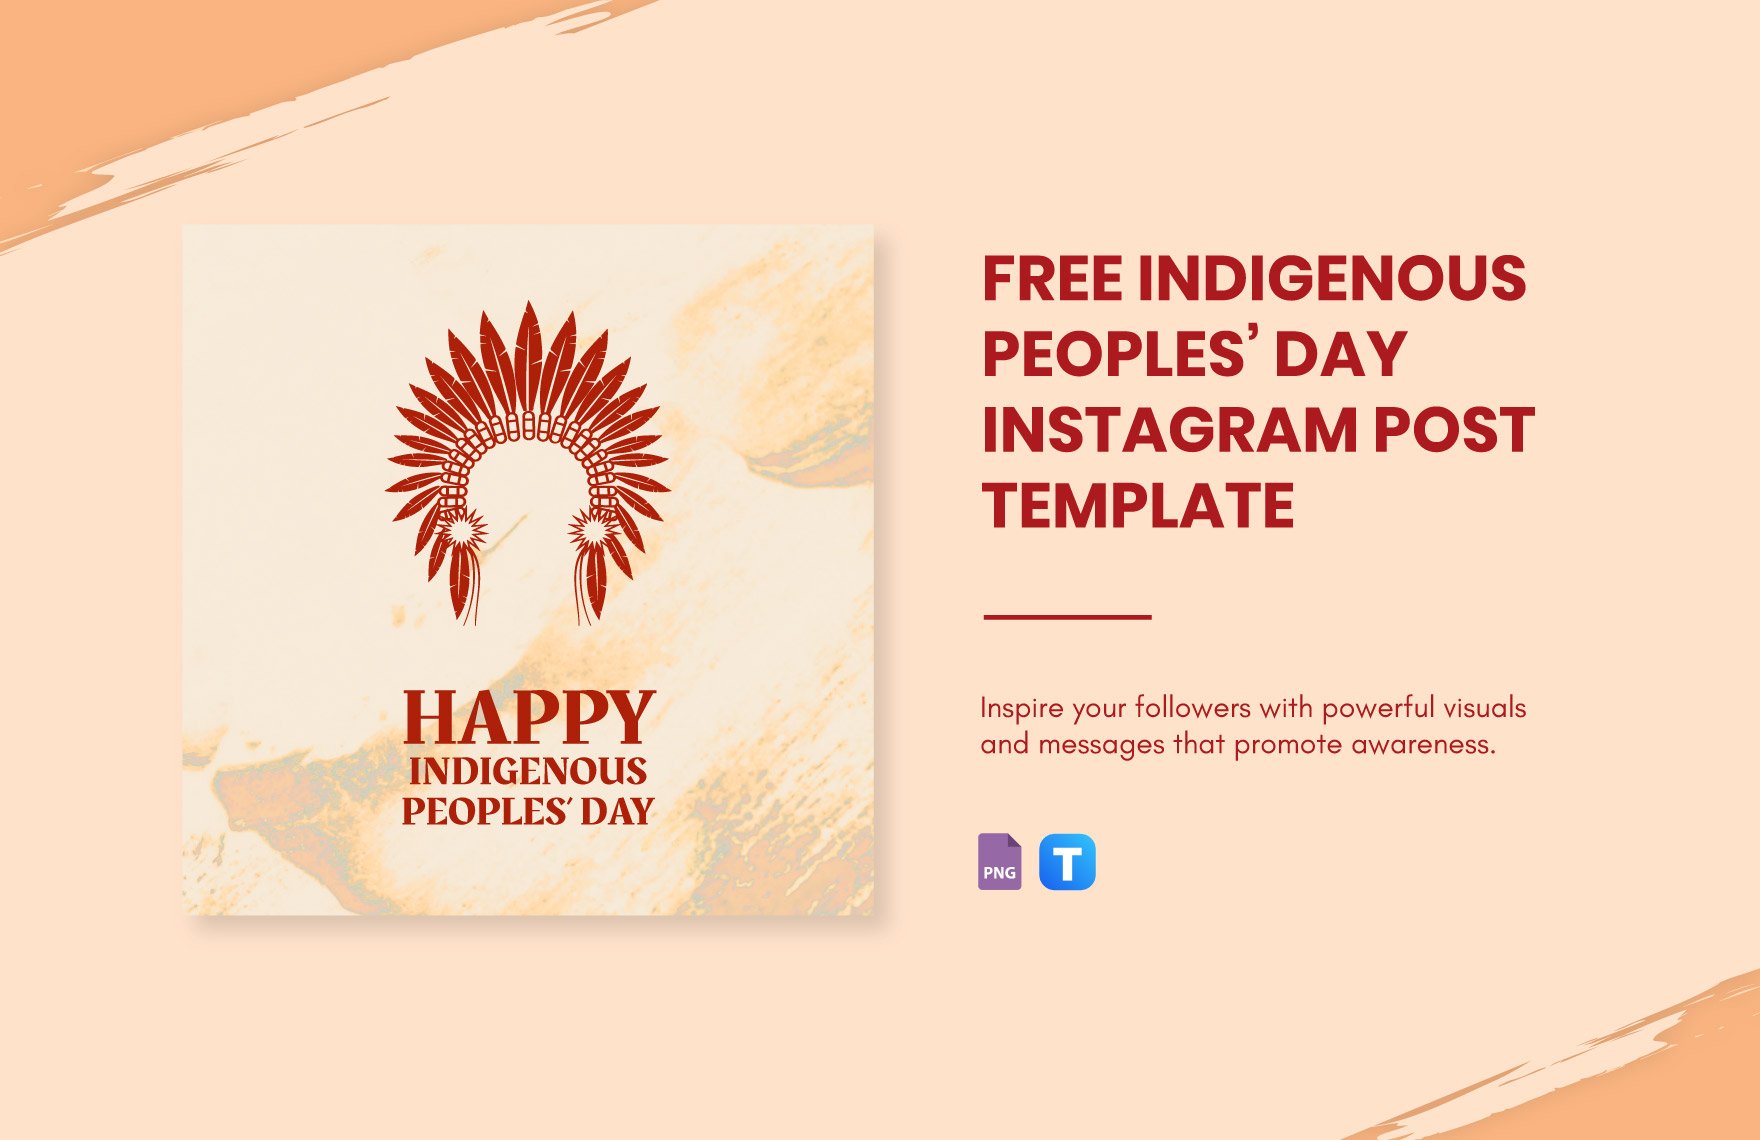 Free Indigenous Peoples' Day Instagram Post Template in PSD, PNG